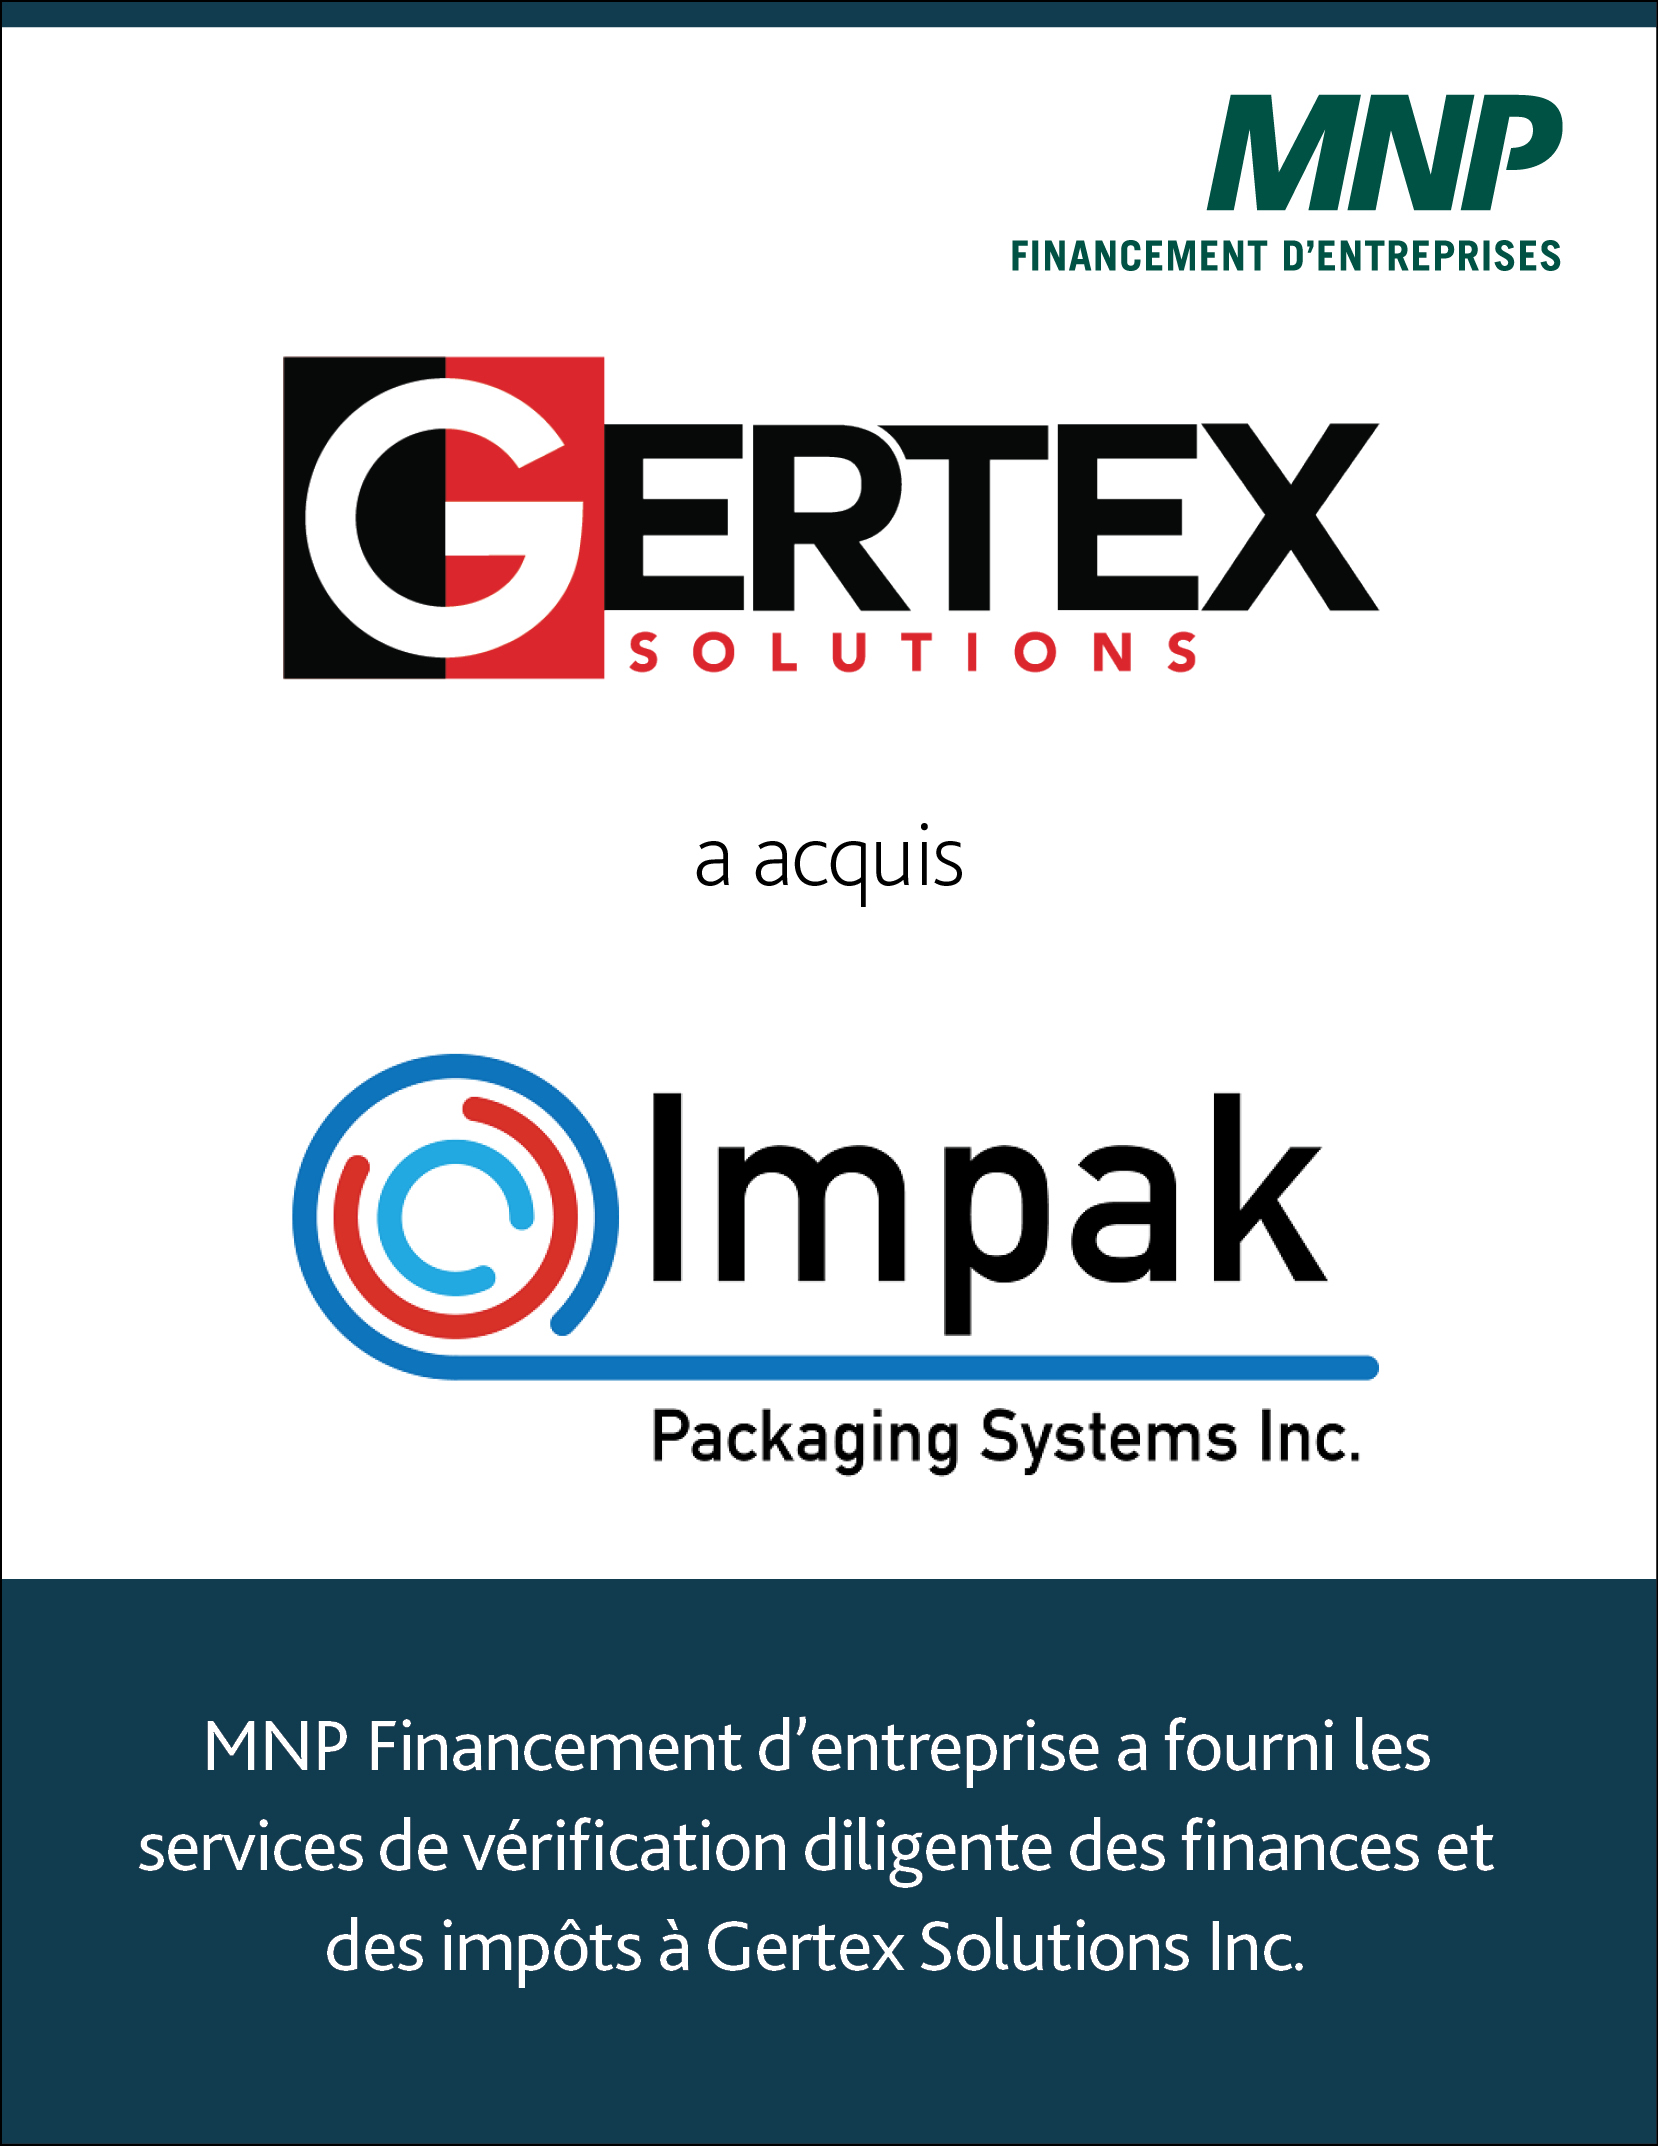 Gertex Solutions a acquis Impak Packaging Systems Inc. 